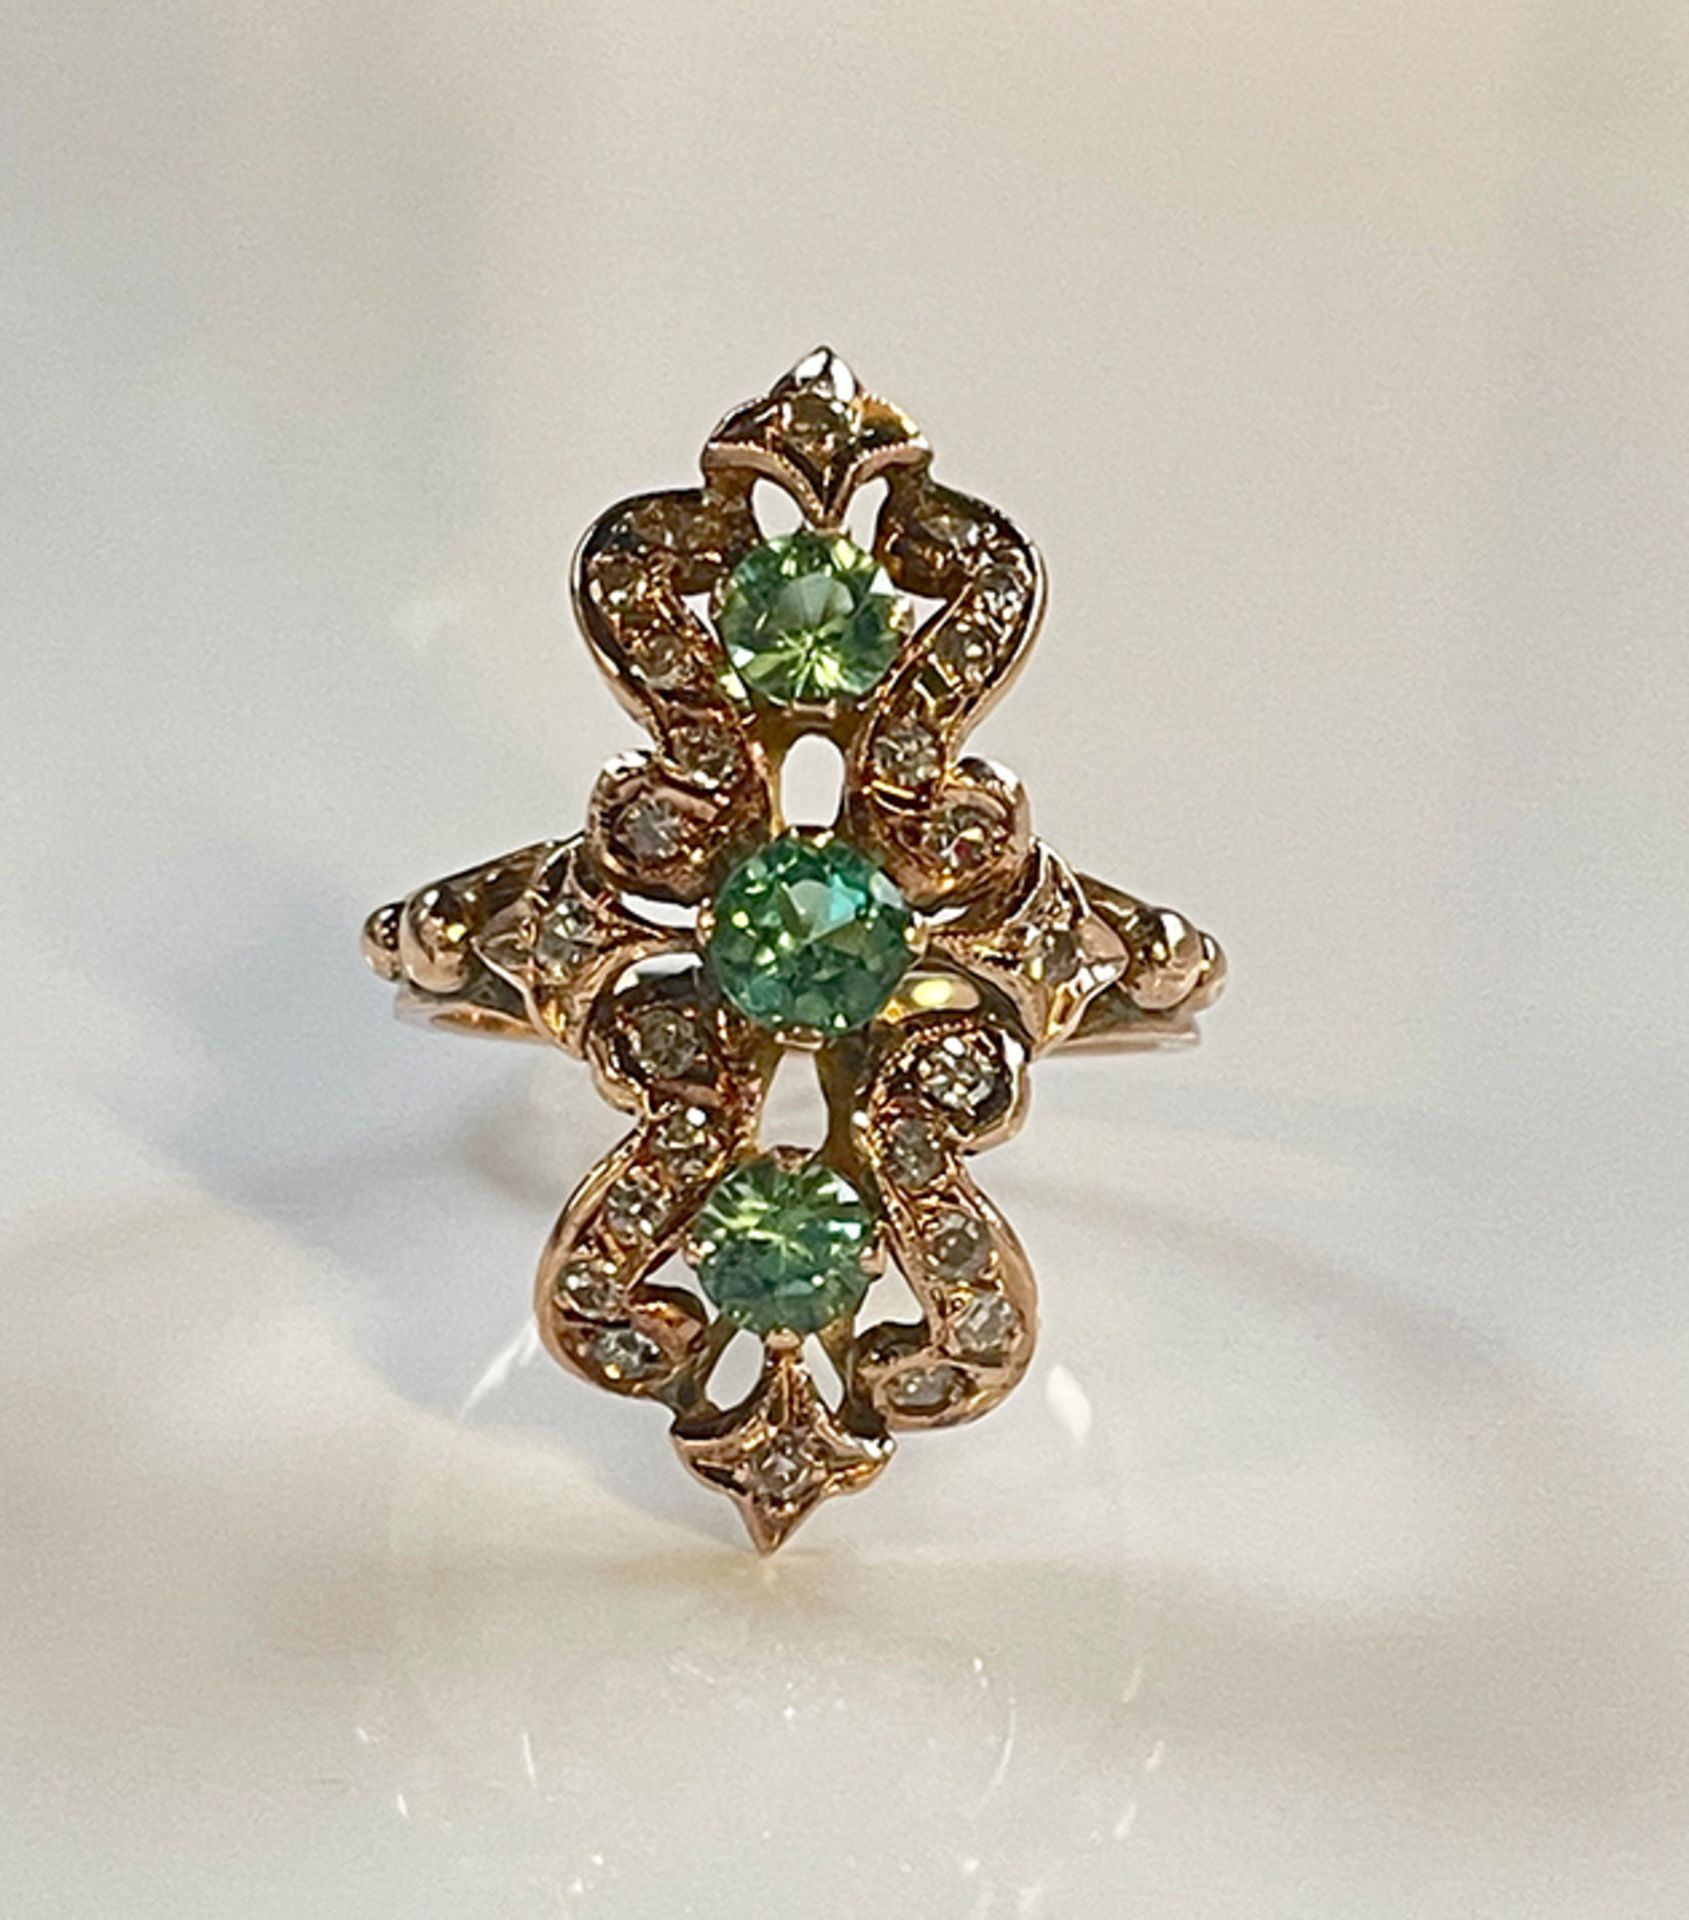 Antique Ring with diamonds and tourmaline.